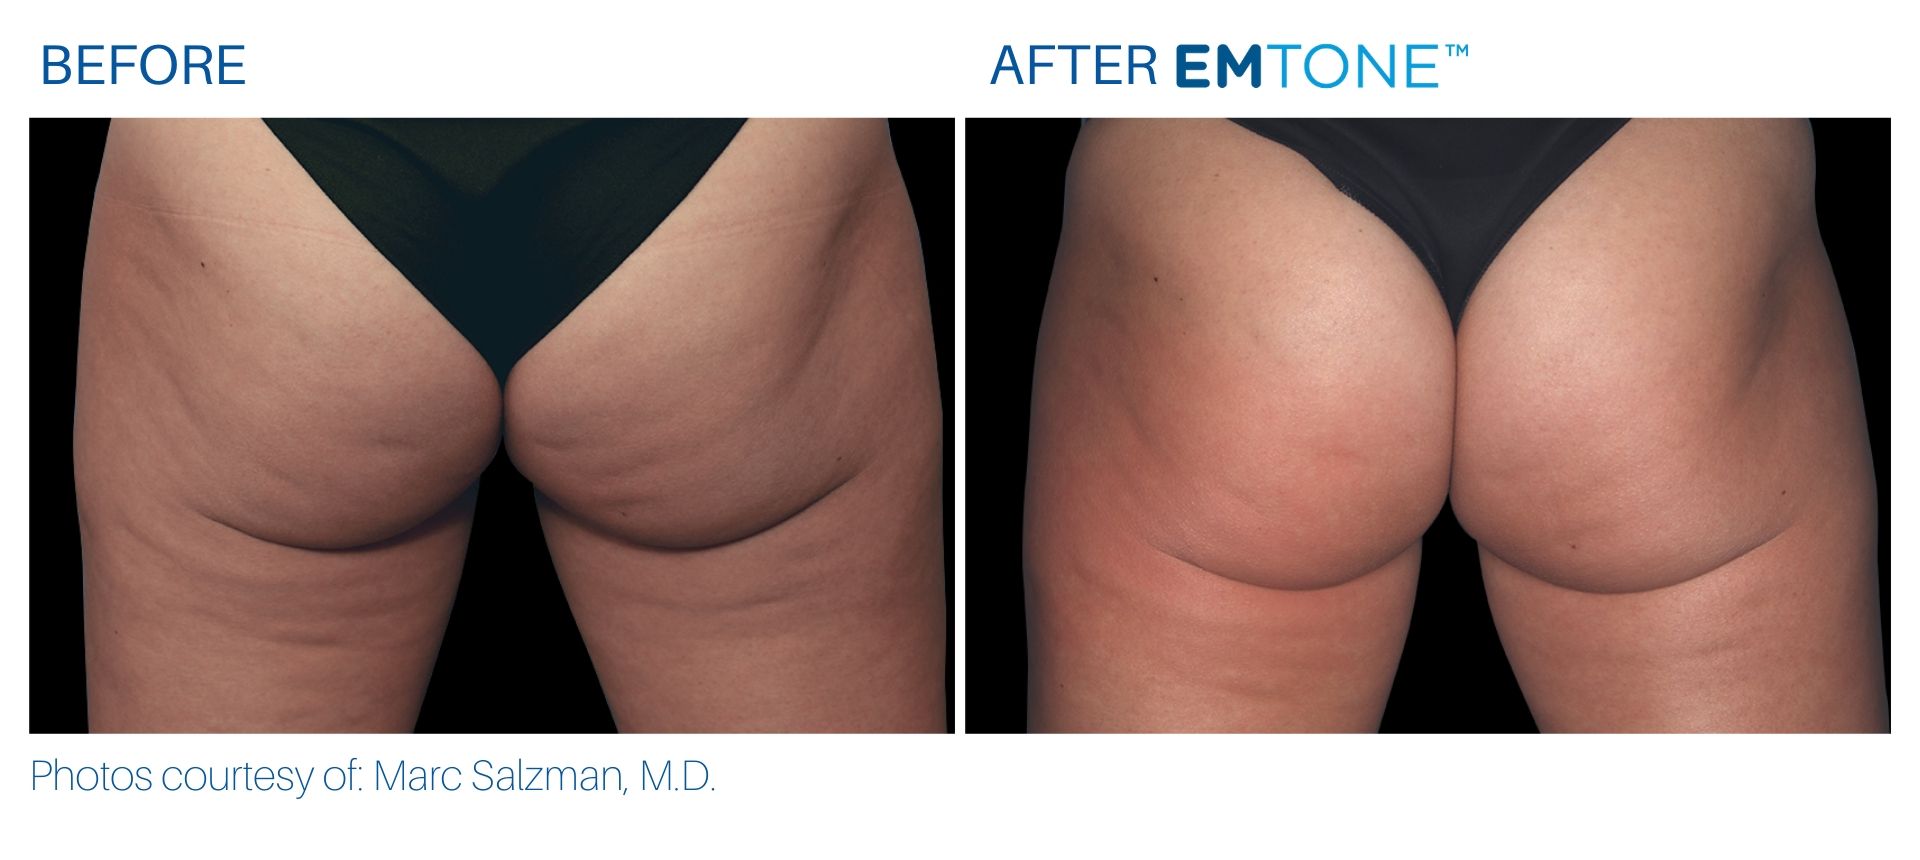 emtone_before_and_after_bodymorphmd_1